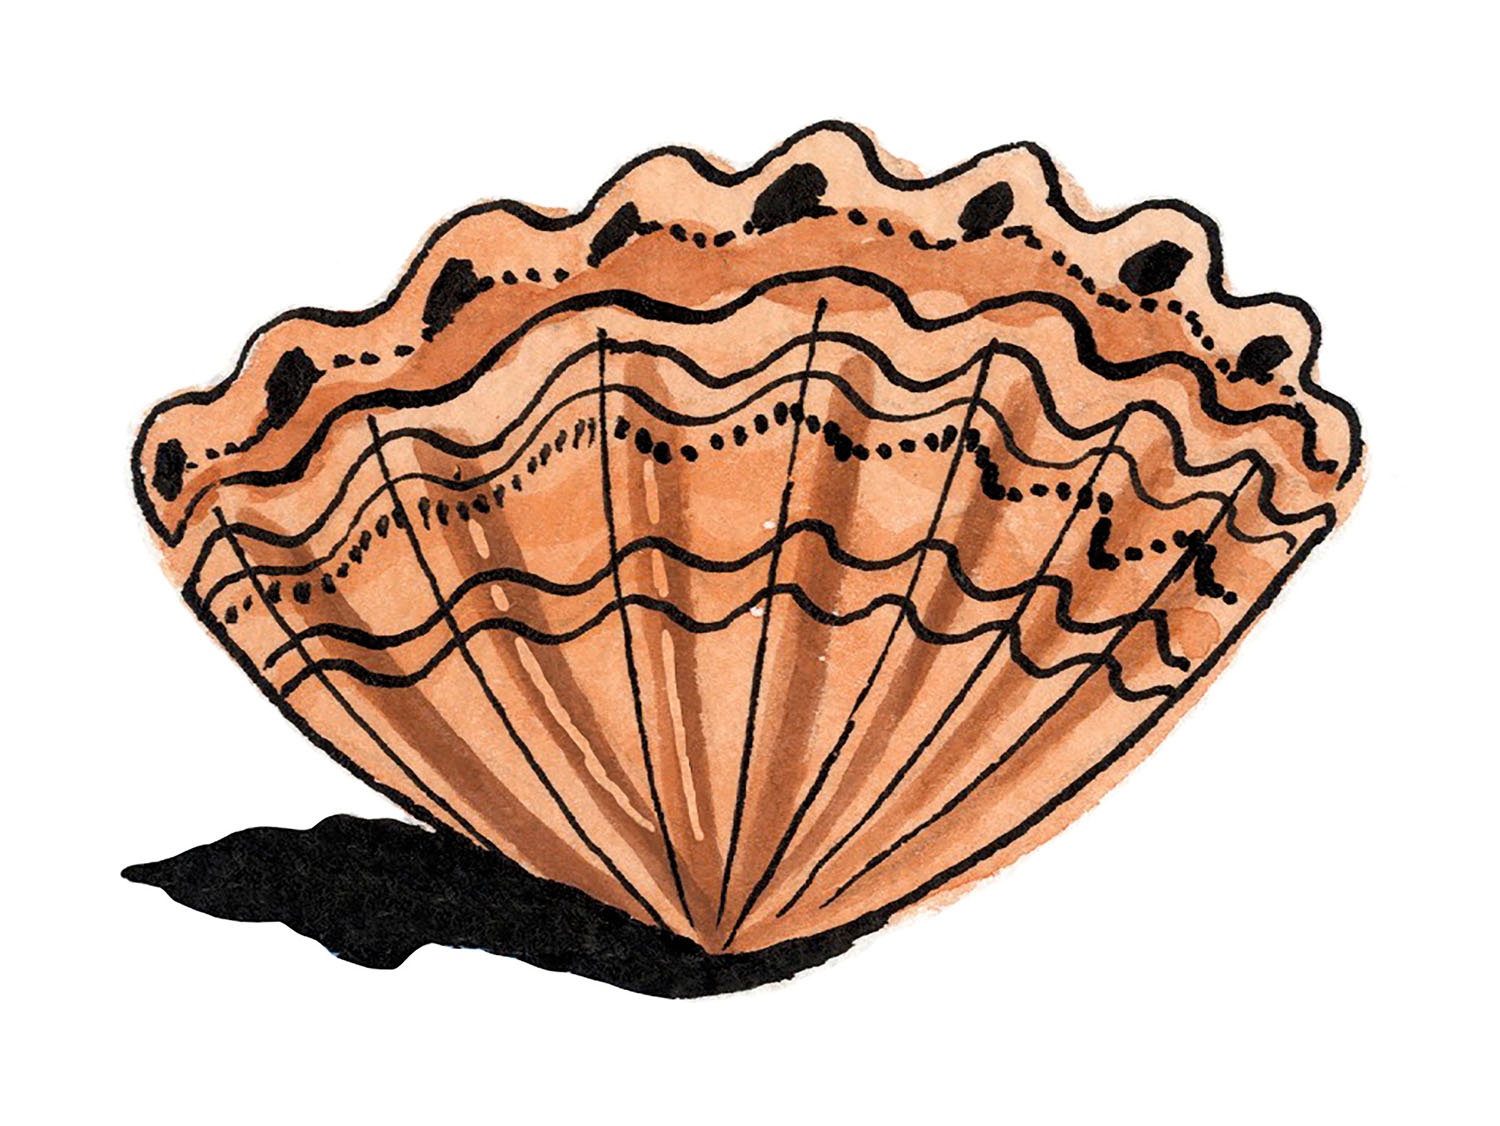 An illustration of an orange-red shell